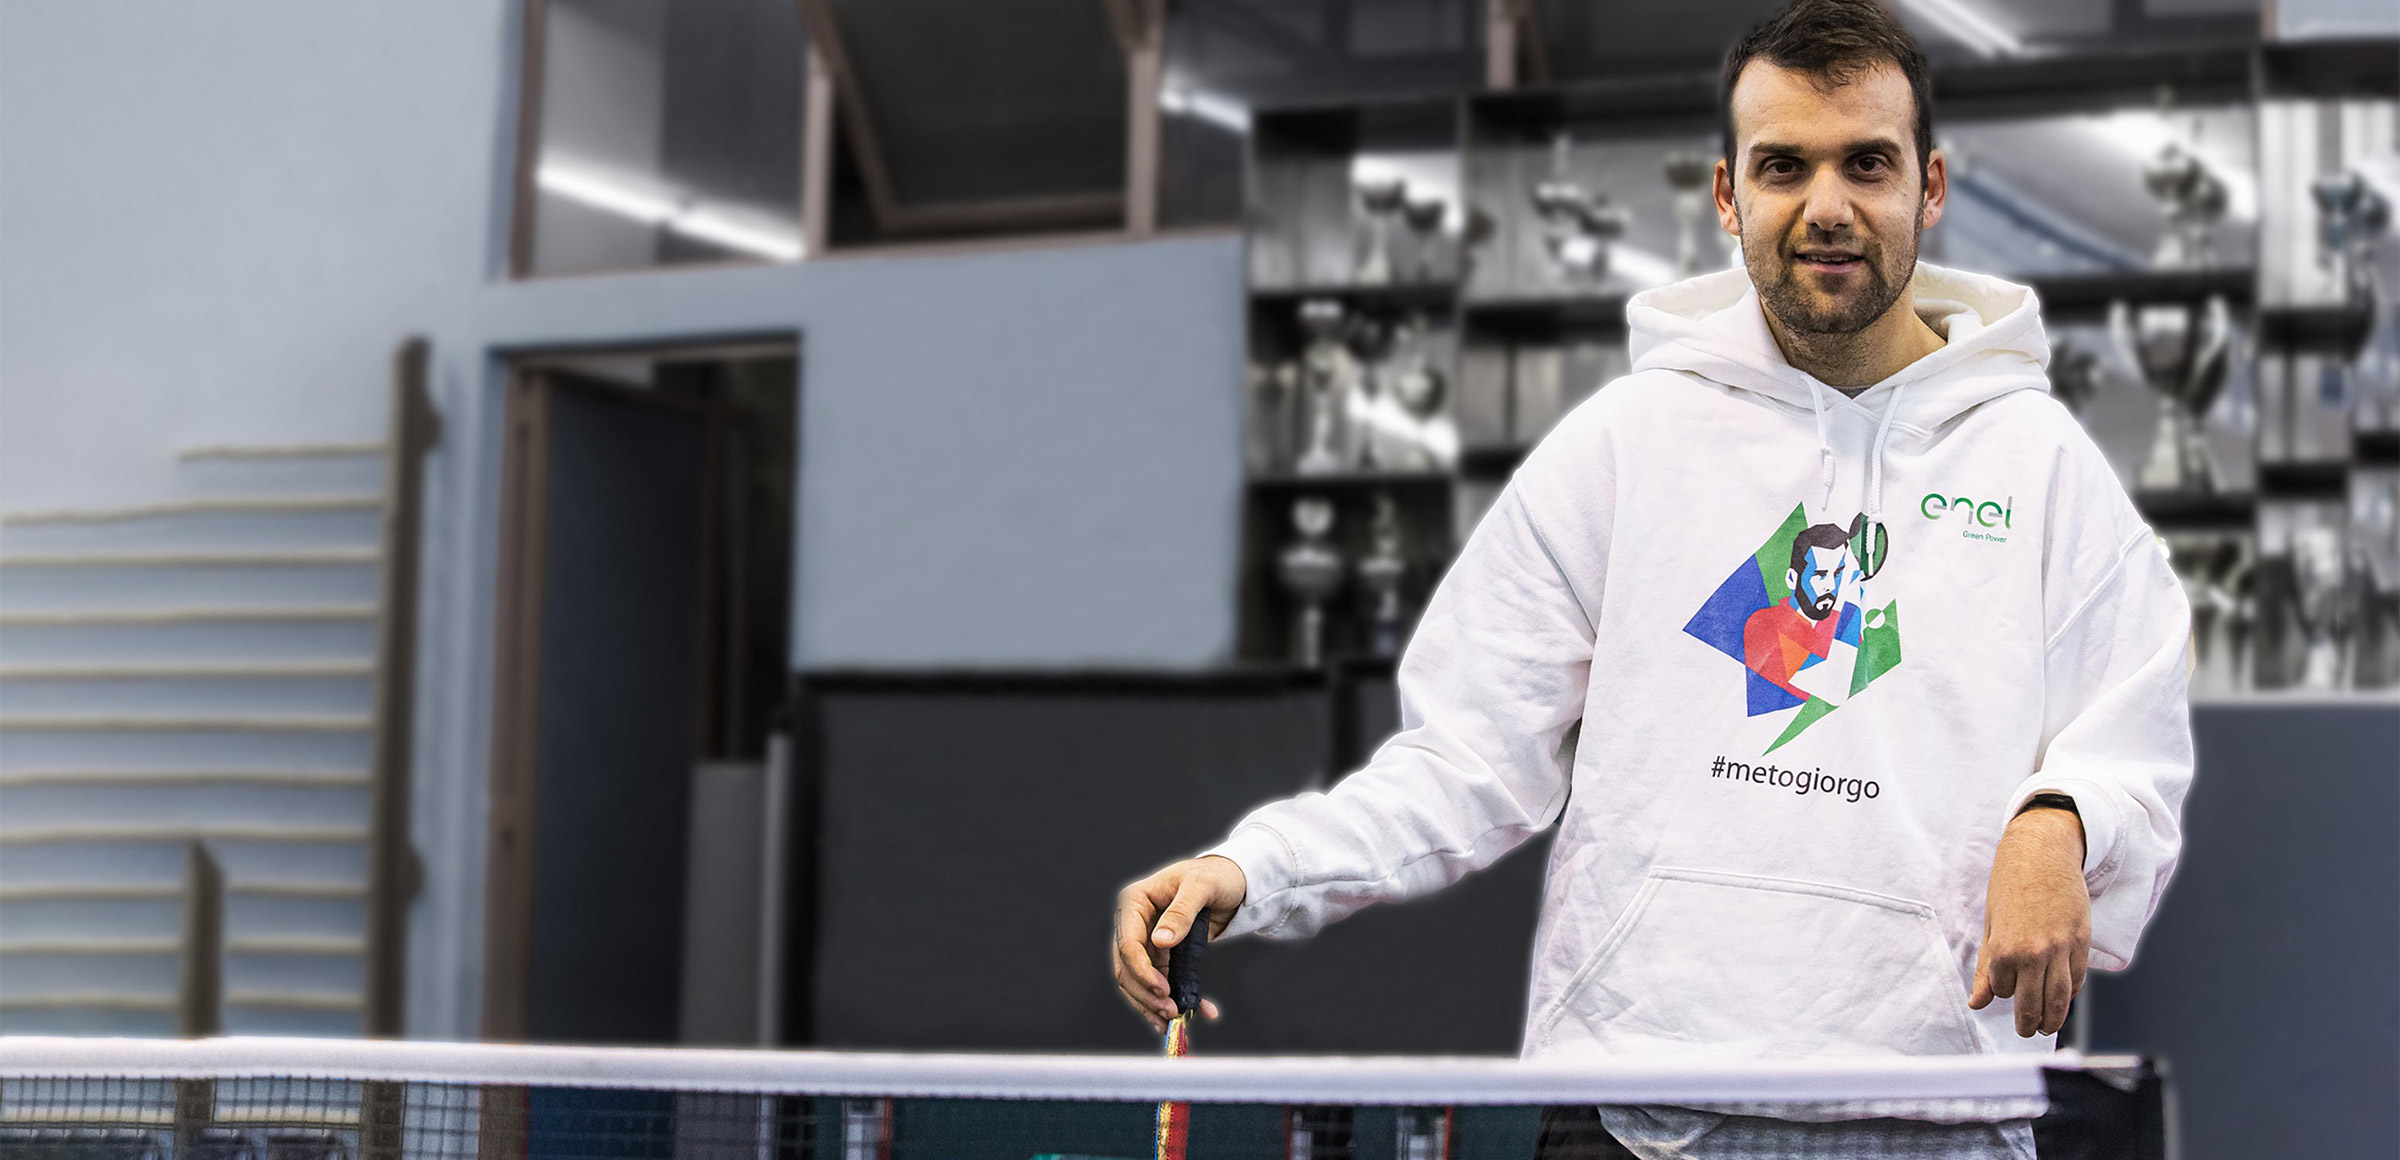 Giorgos Mouchthis, a table tennis champion and an inspiration to